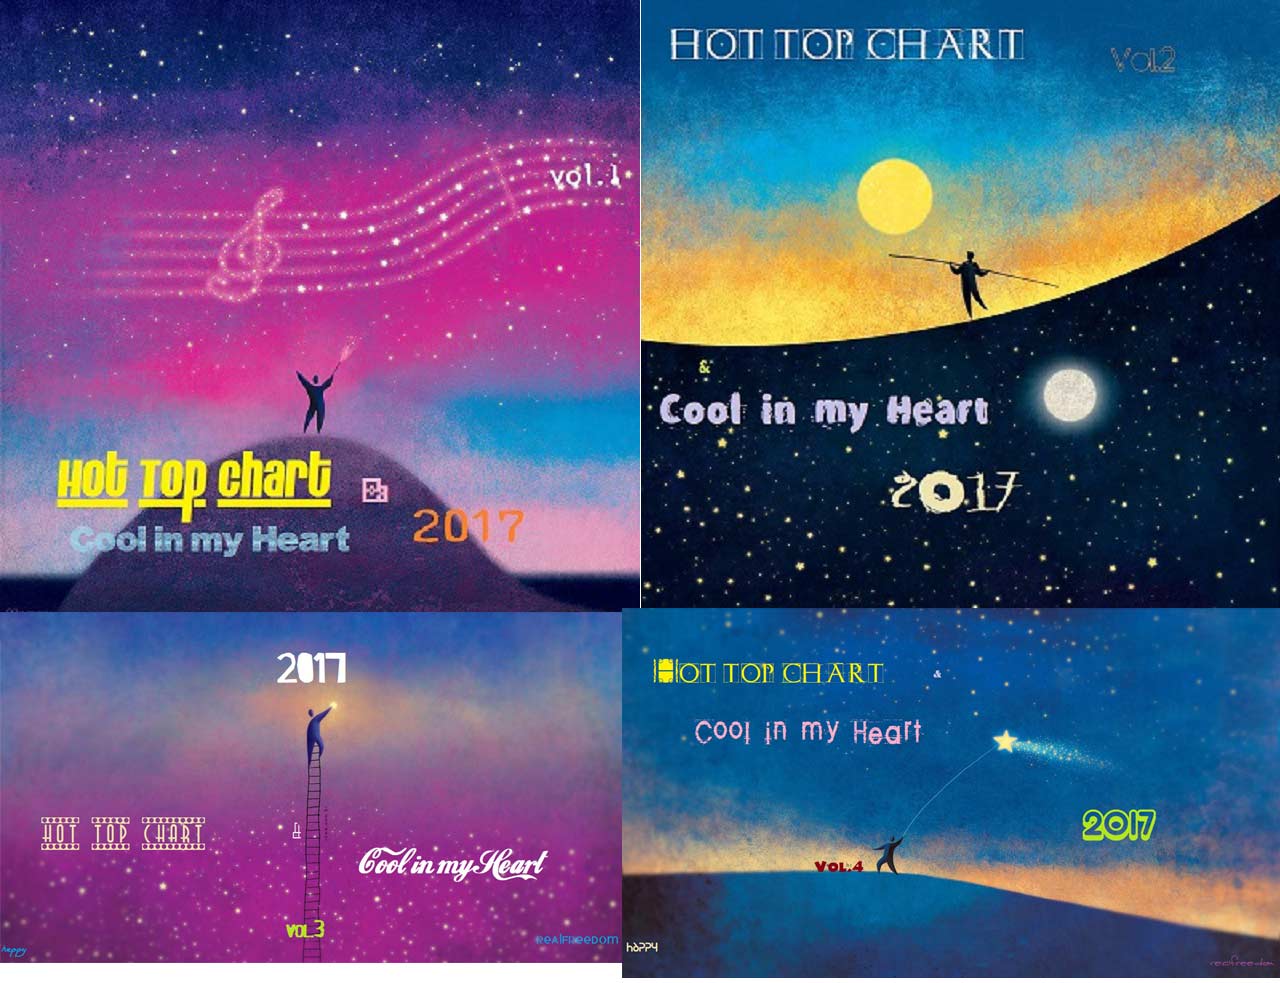 3878 Hot Top Chart & Cool in my Heart 2017 vol.3-4